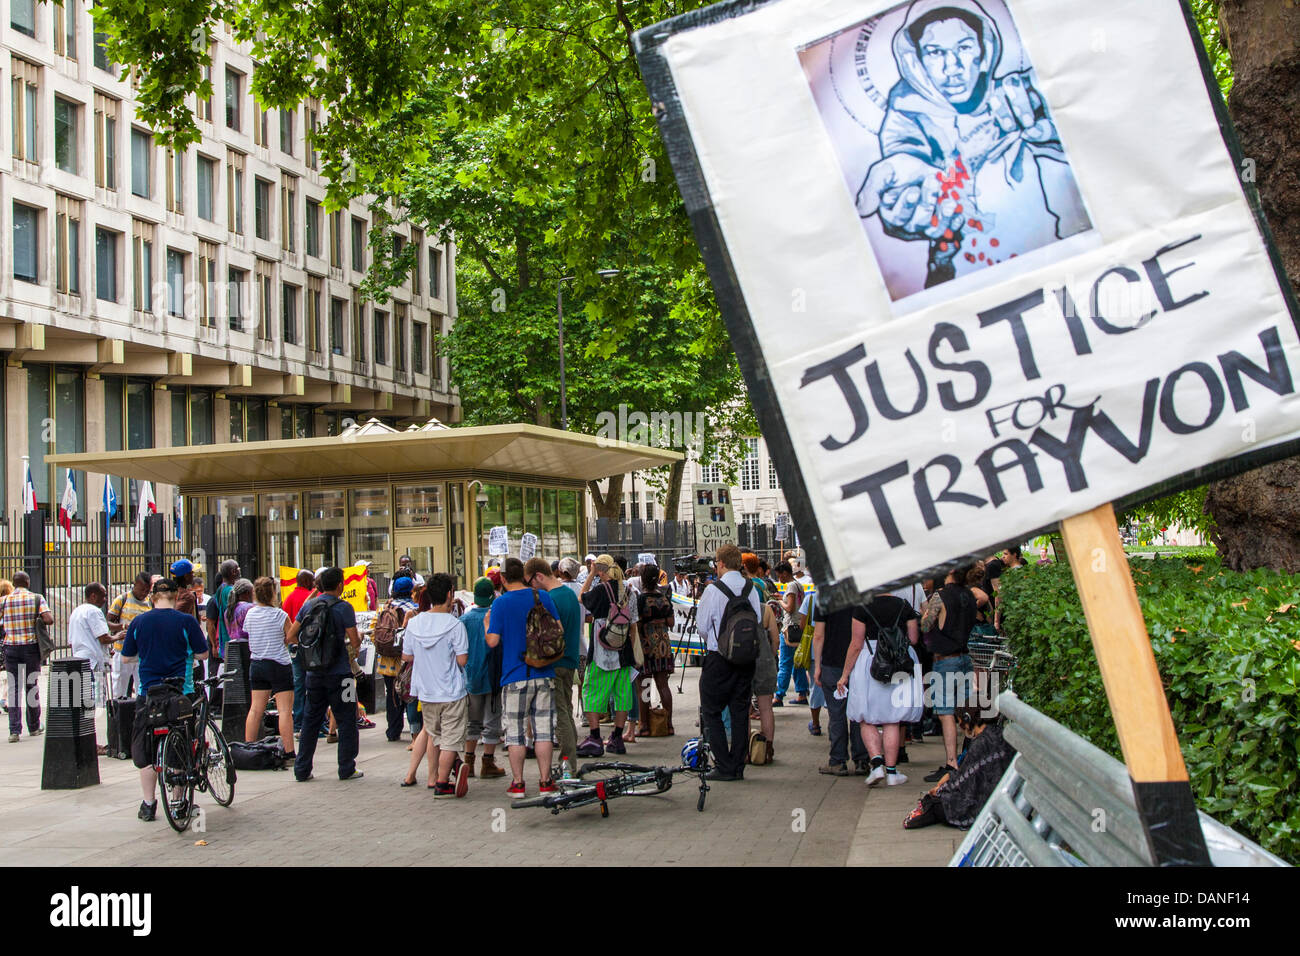 London, UK. 16th July, 2013. Protesters demonstrate outside the US embassy in London against the acquittal of George Zimmerman who shot 17 year-old Trayvon Martin in Florida. Credit:  Paul Davey/Alamy Live News Stock Photo